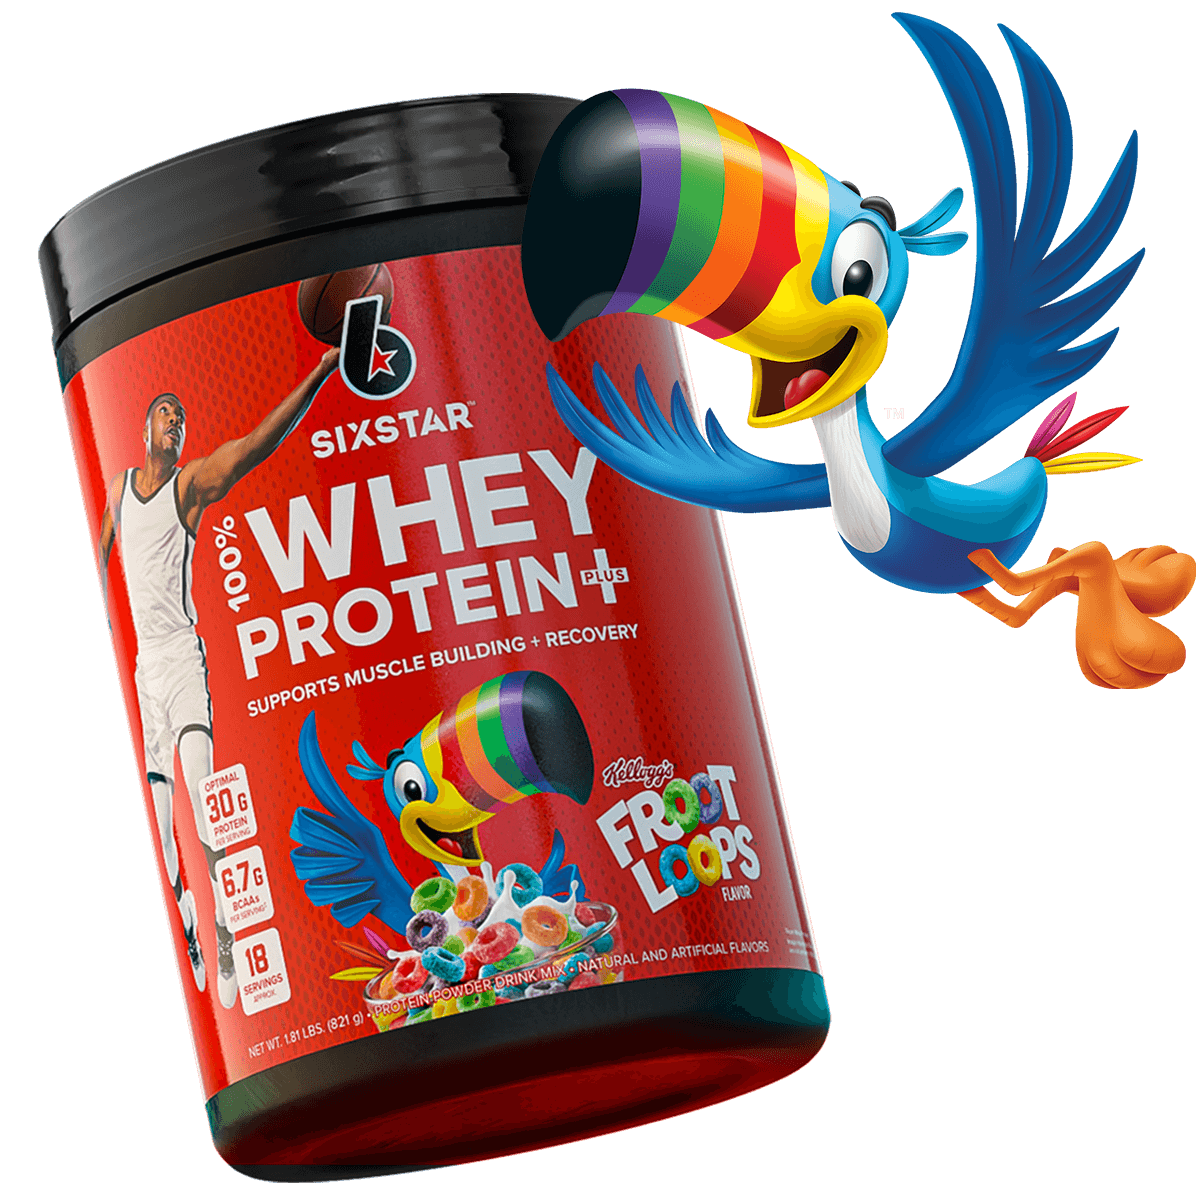 100% Whey Protein Plus - Froot Loops